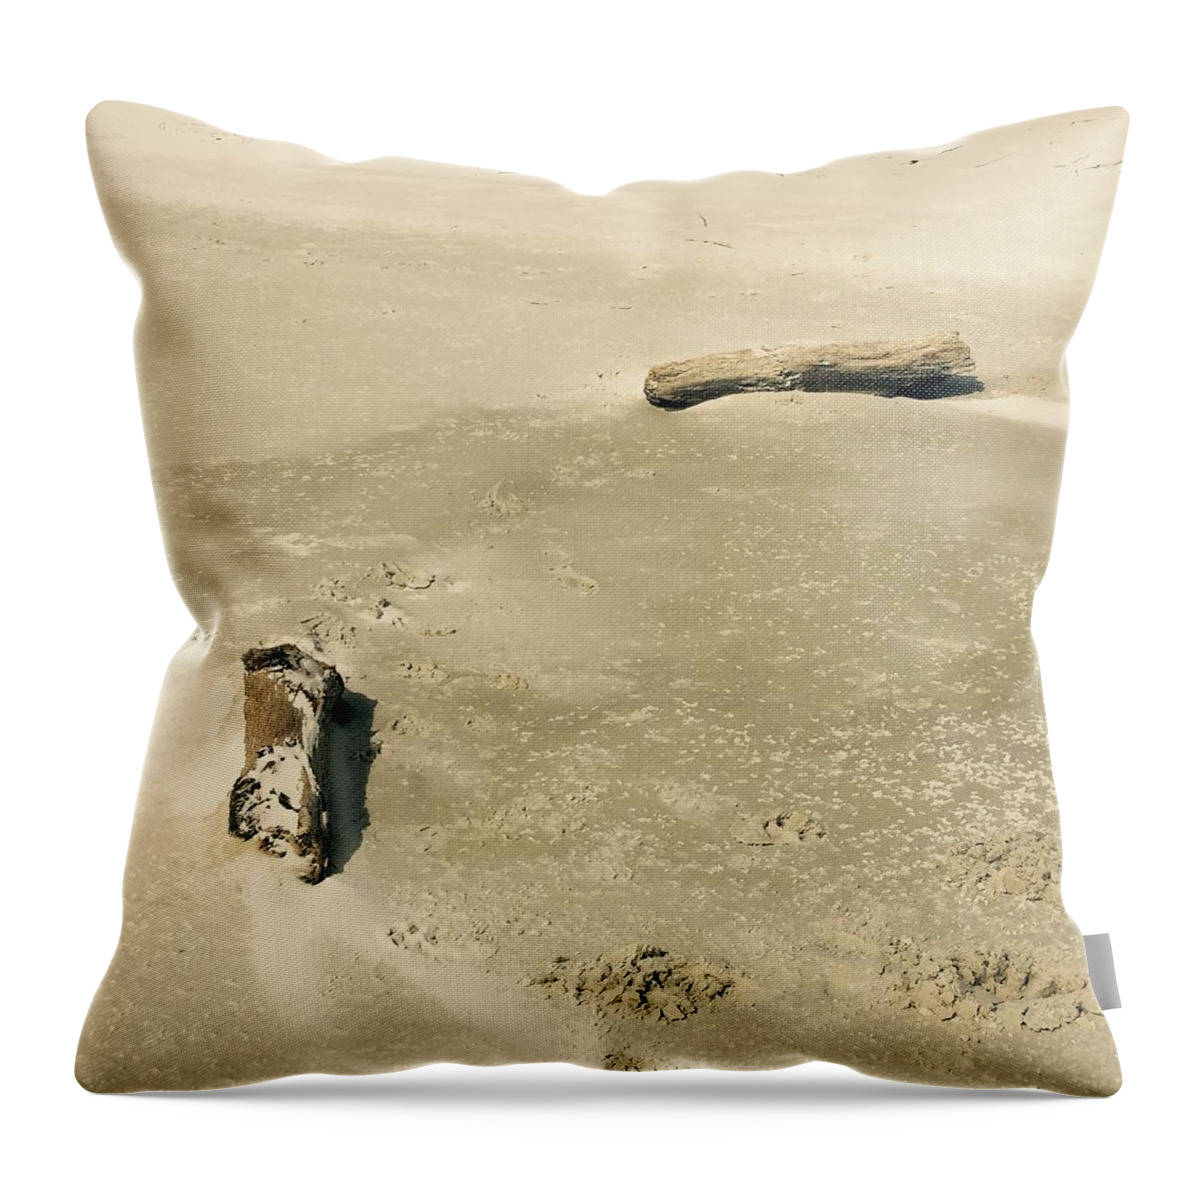 Landscape Throw Pillow featuring the photograph Driftwood by Amber Skinner